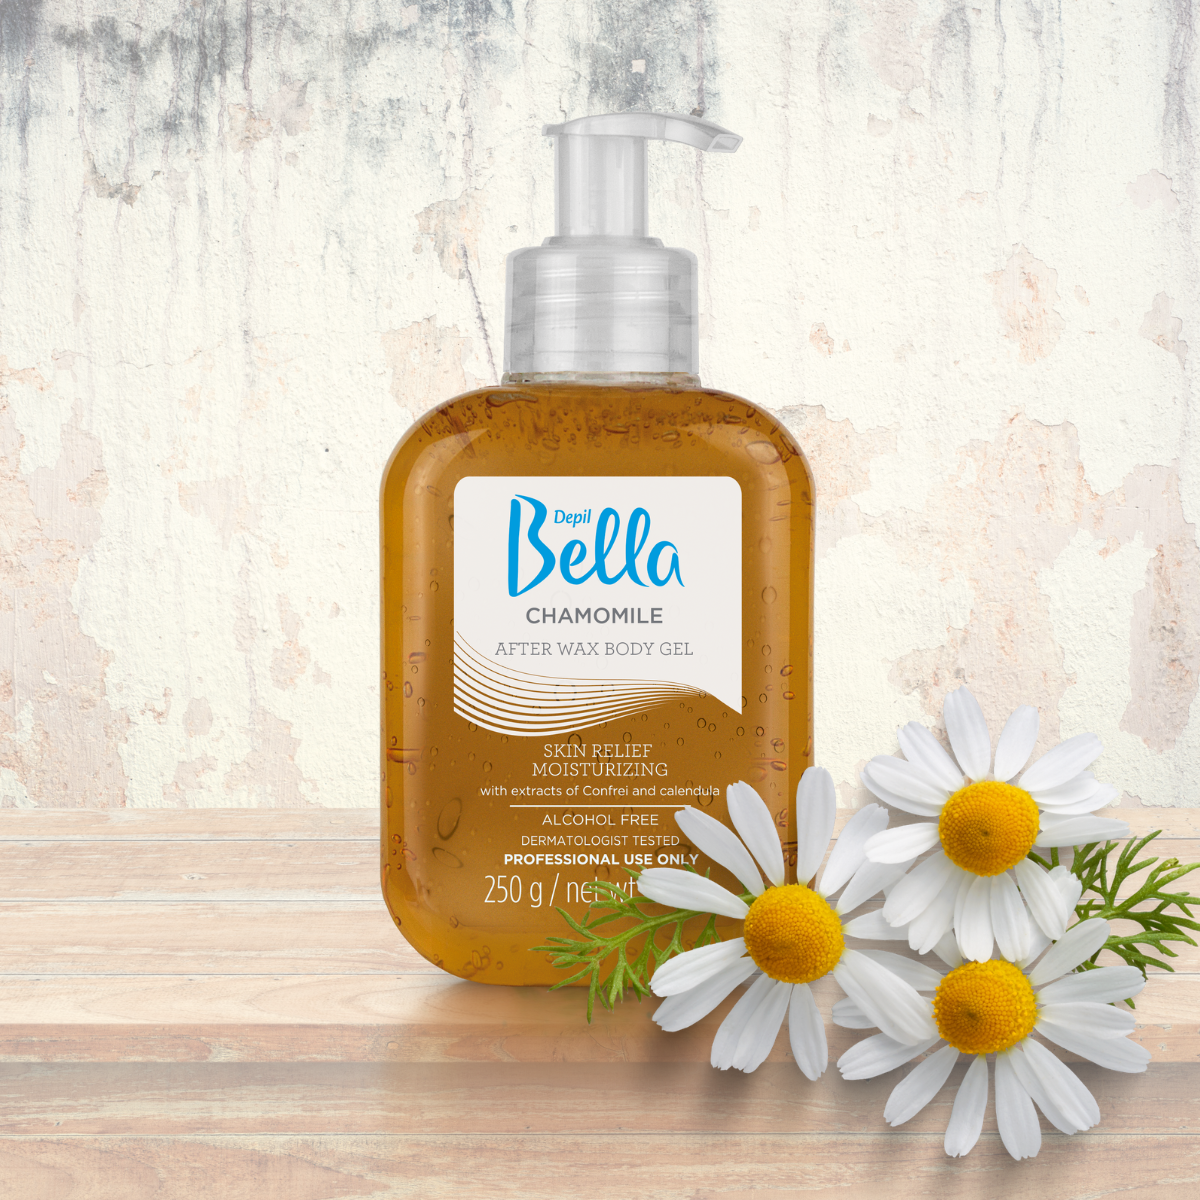 Depil Bella Chamomile Post-Waxing Body Gel 250g (3 Units Offer) - Buy professional cosmetics dedicated to hair removal